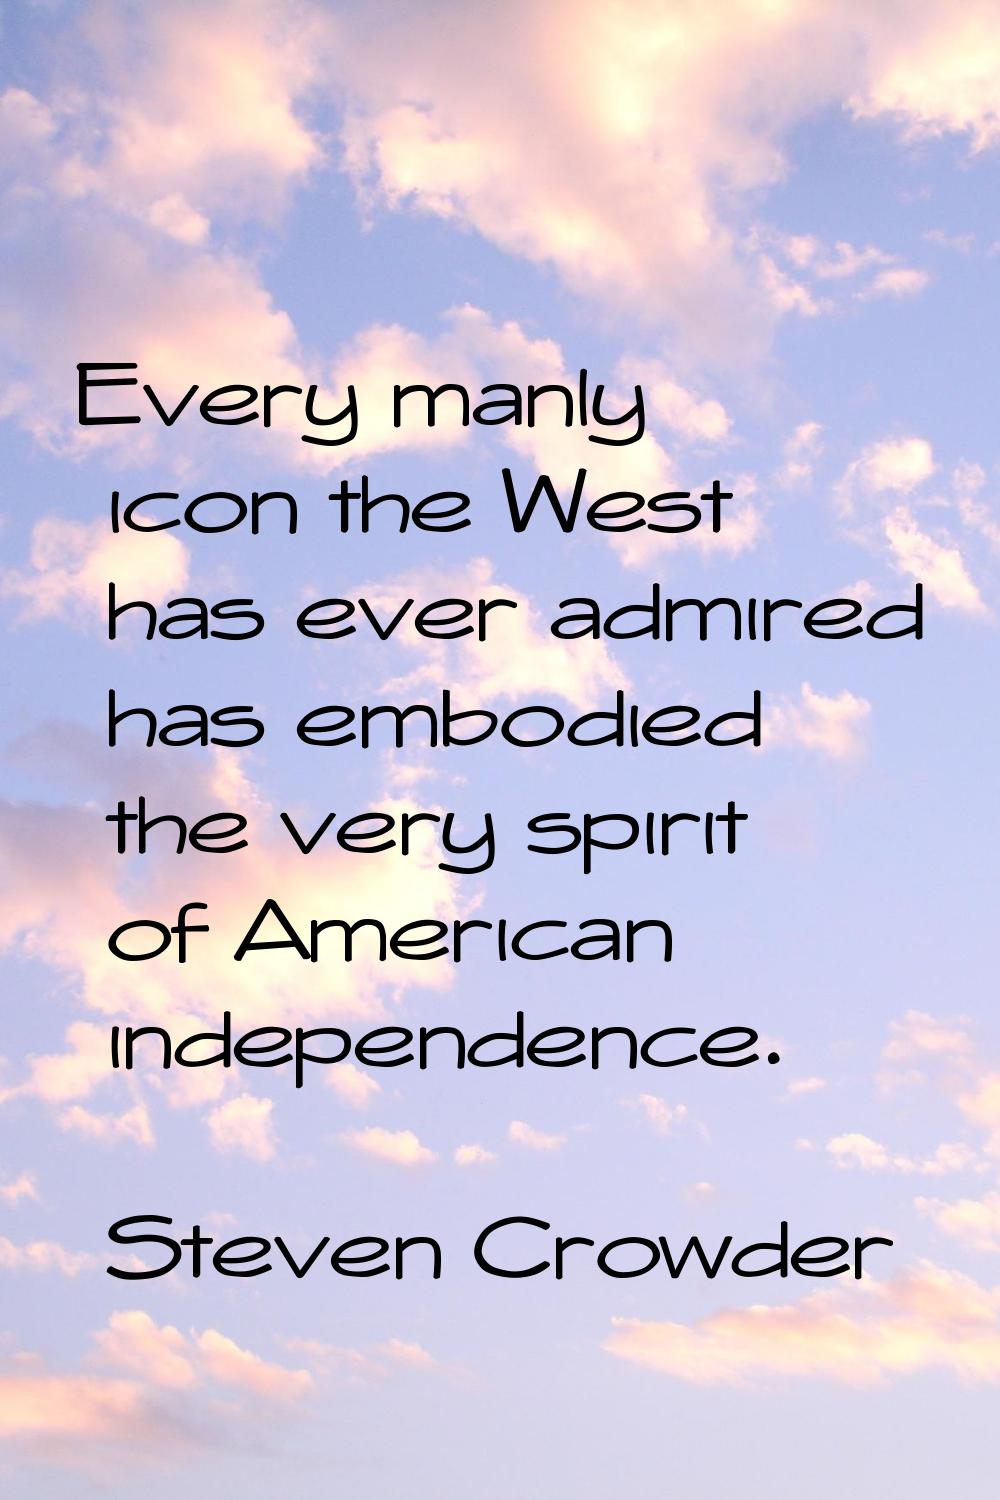 Every manly icon the West has ever admired has embodied the very spirit of American independence.